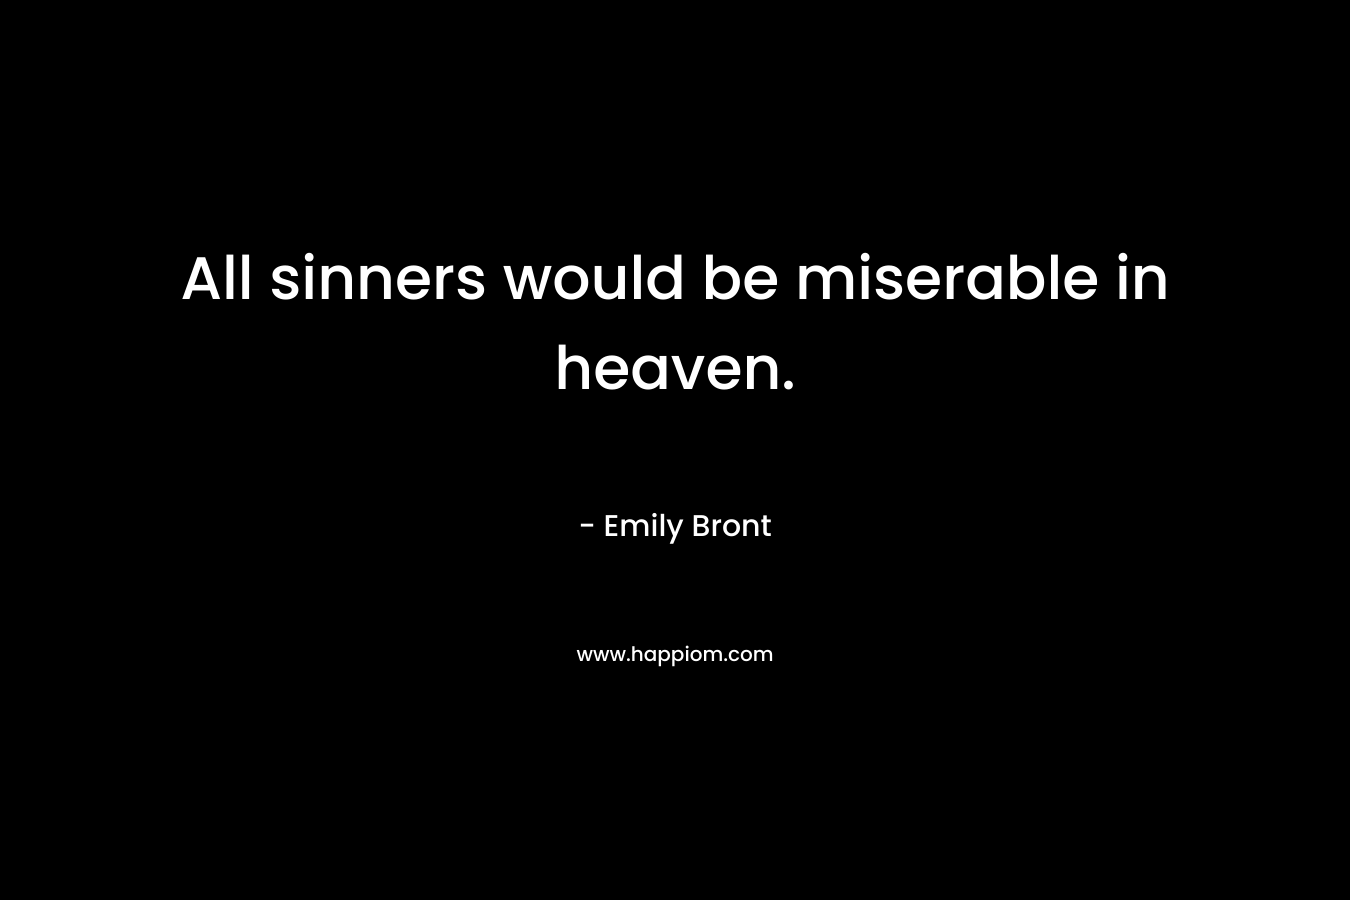 All sinners would be miserable in heaven. – Emily Bront